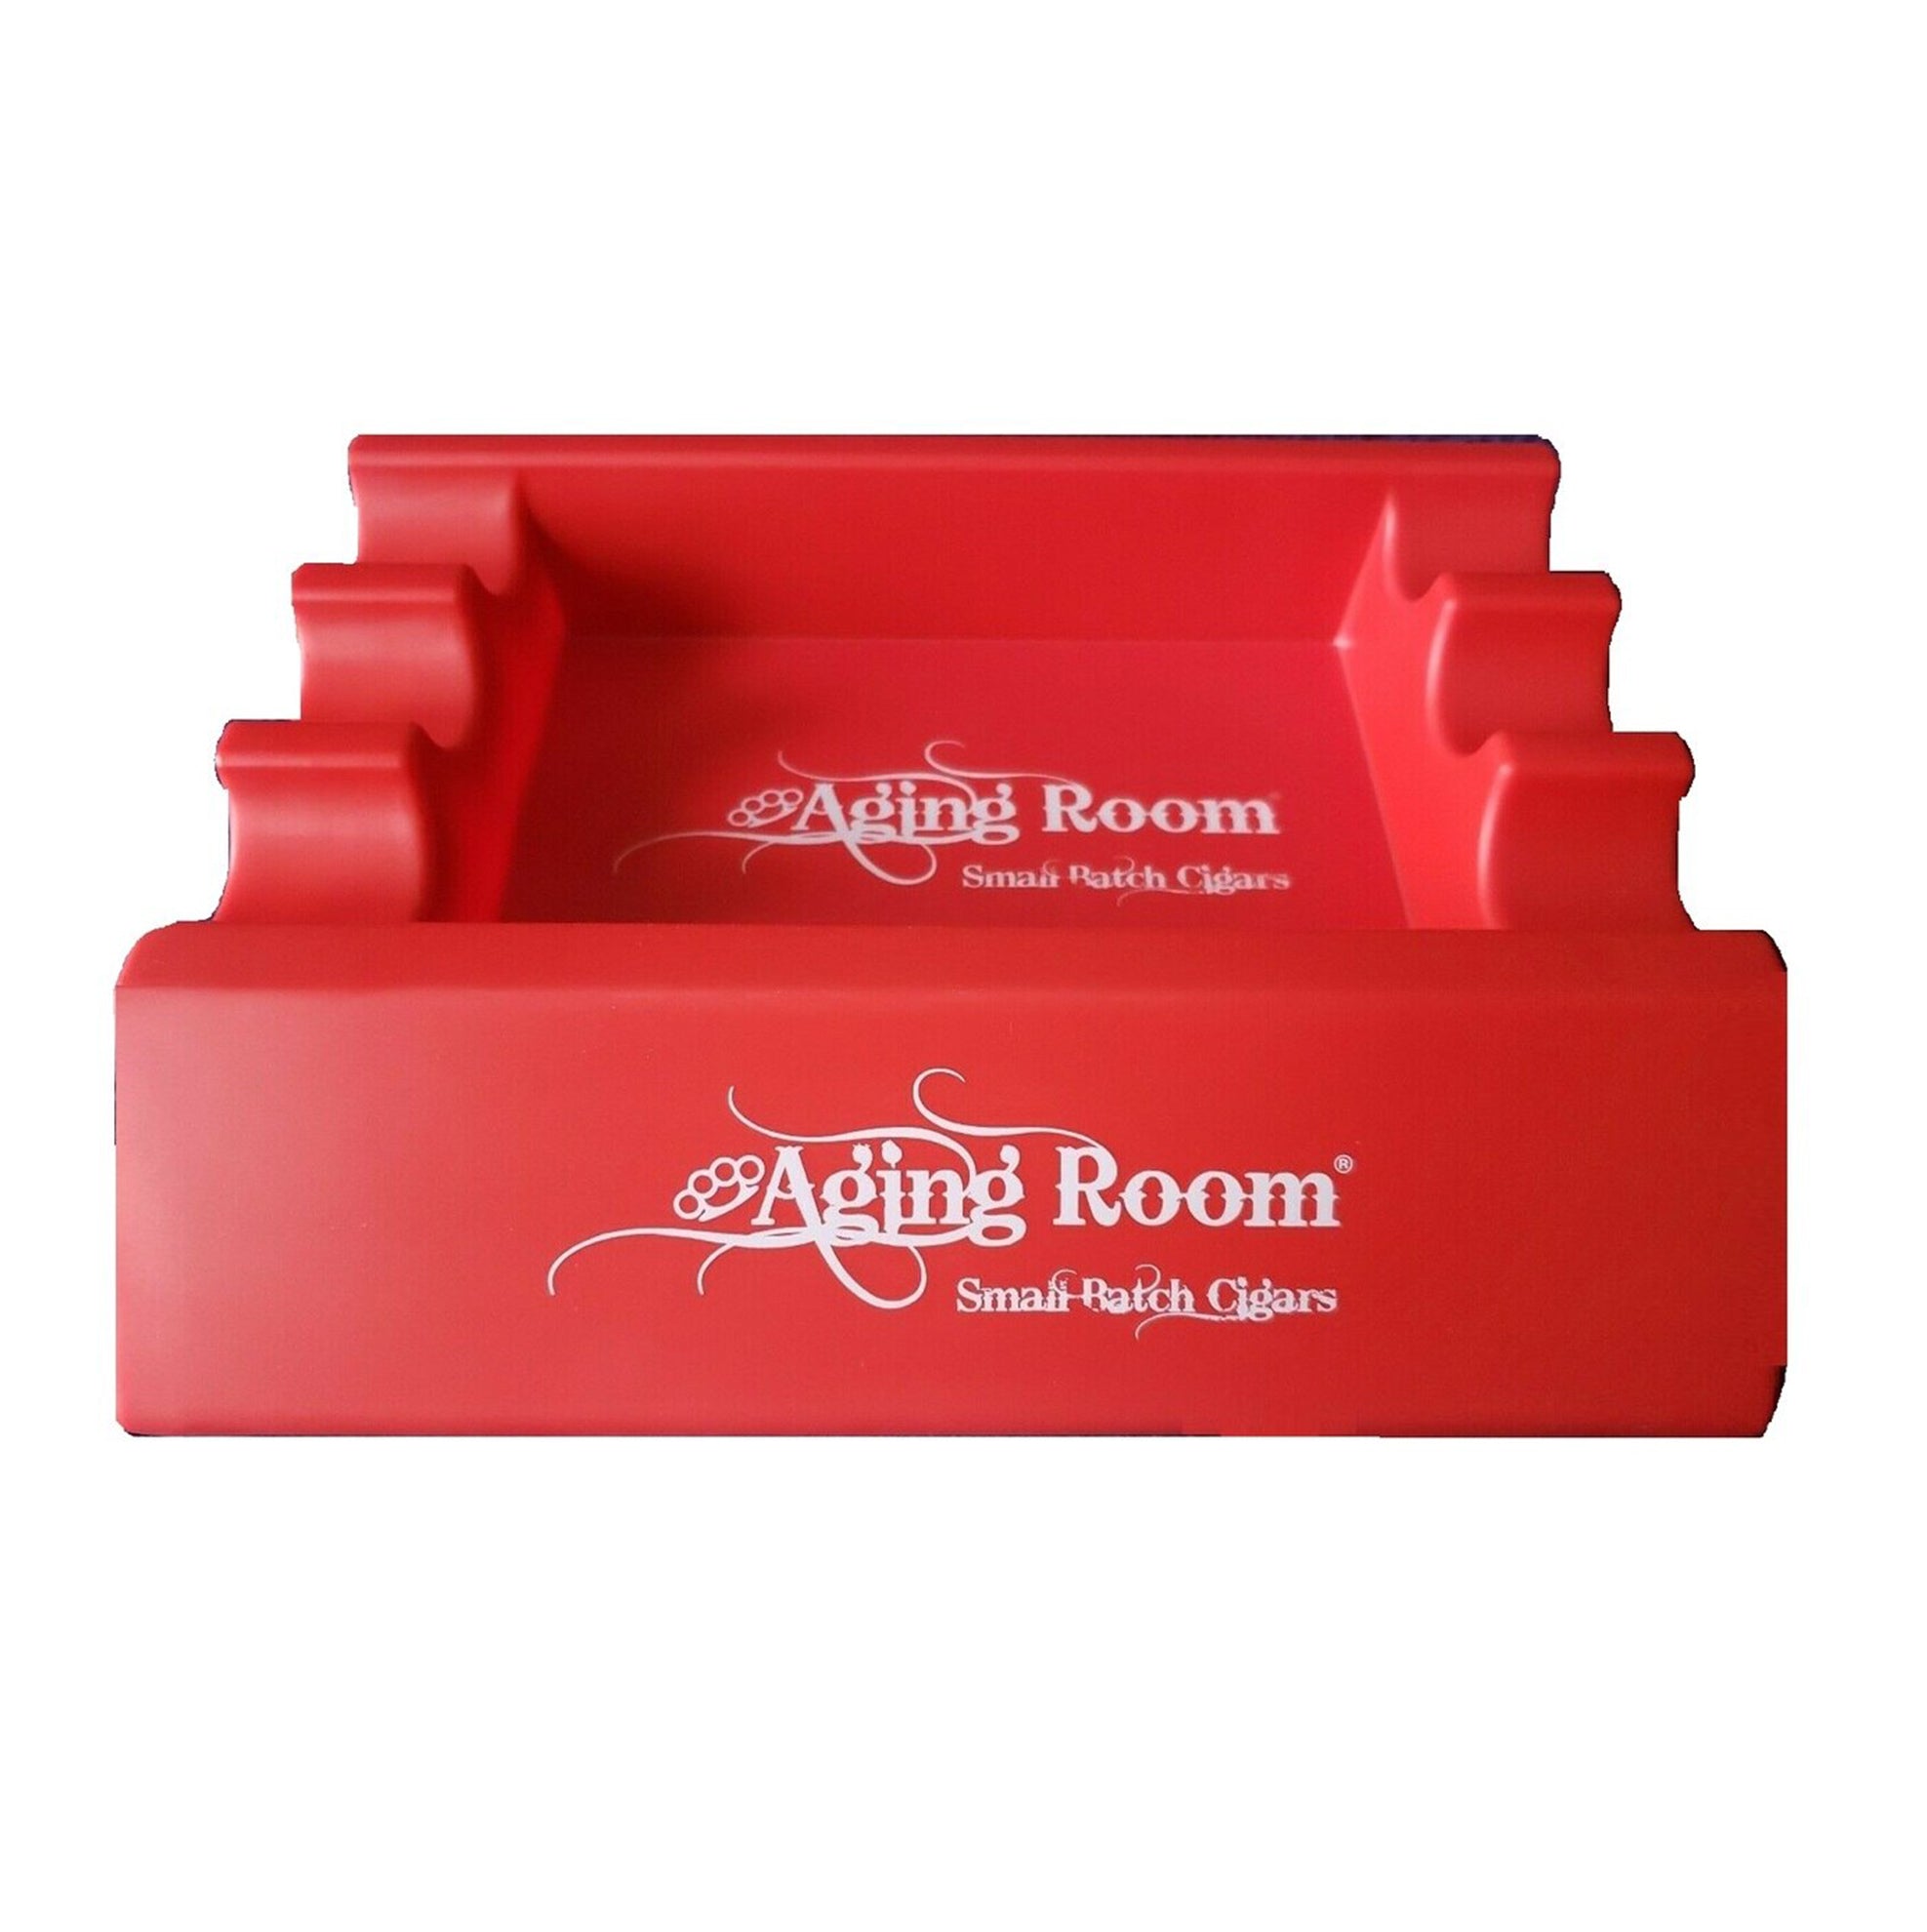 AGING ROOM Indoor and Outdoor Large Ashtray for Cigars